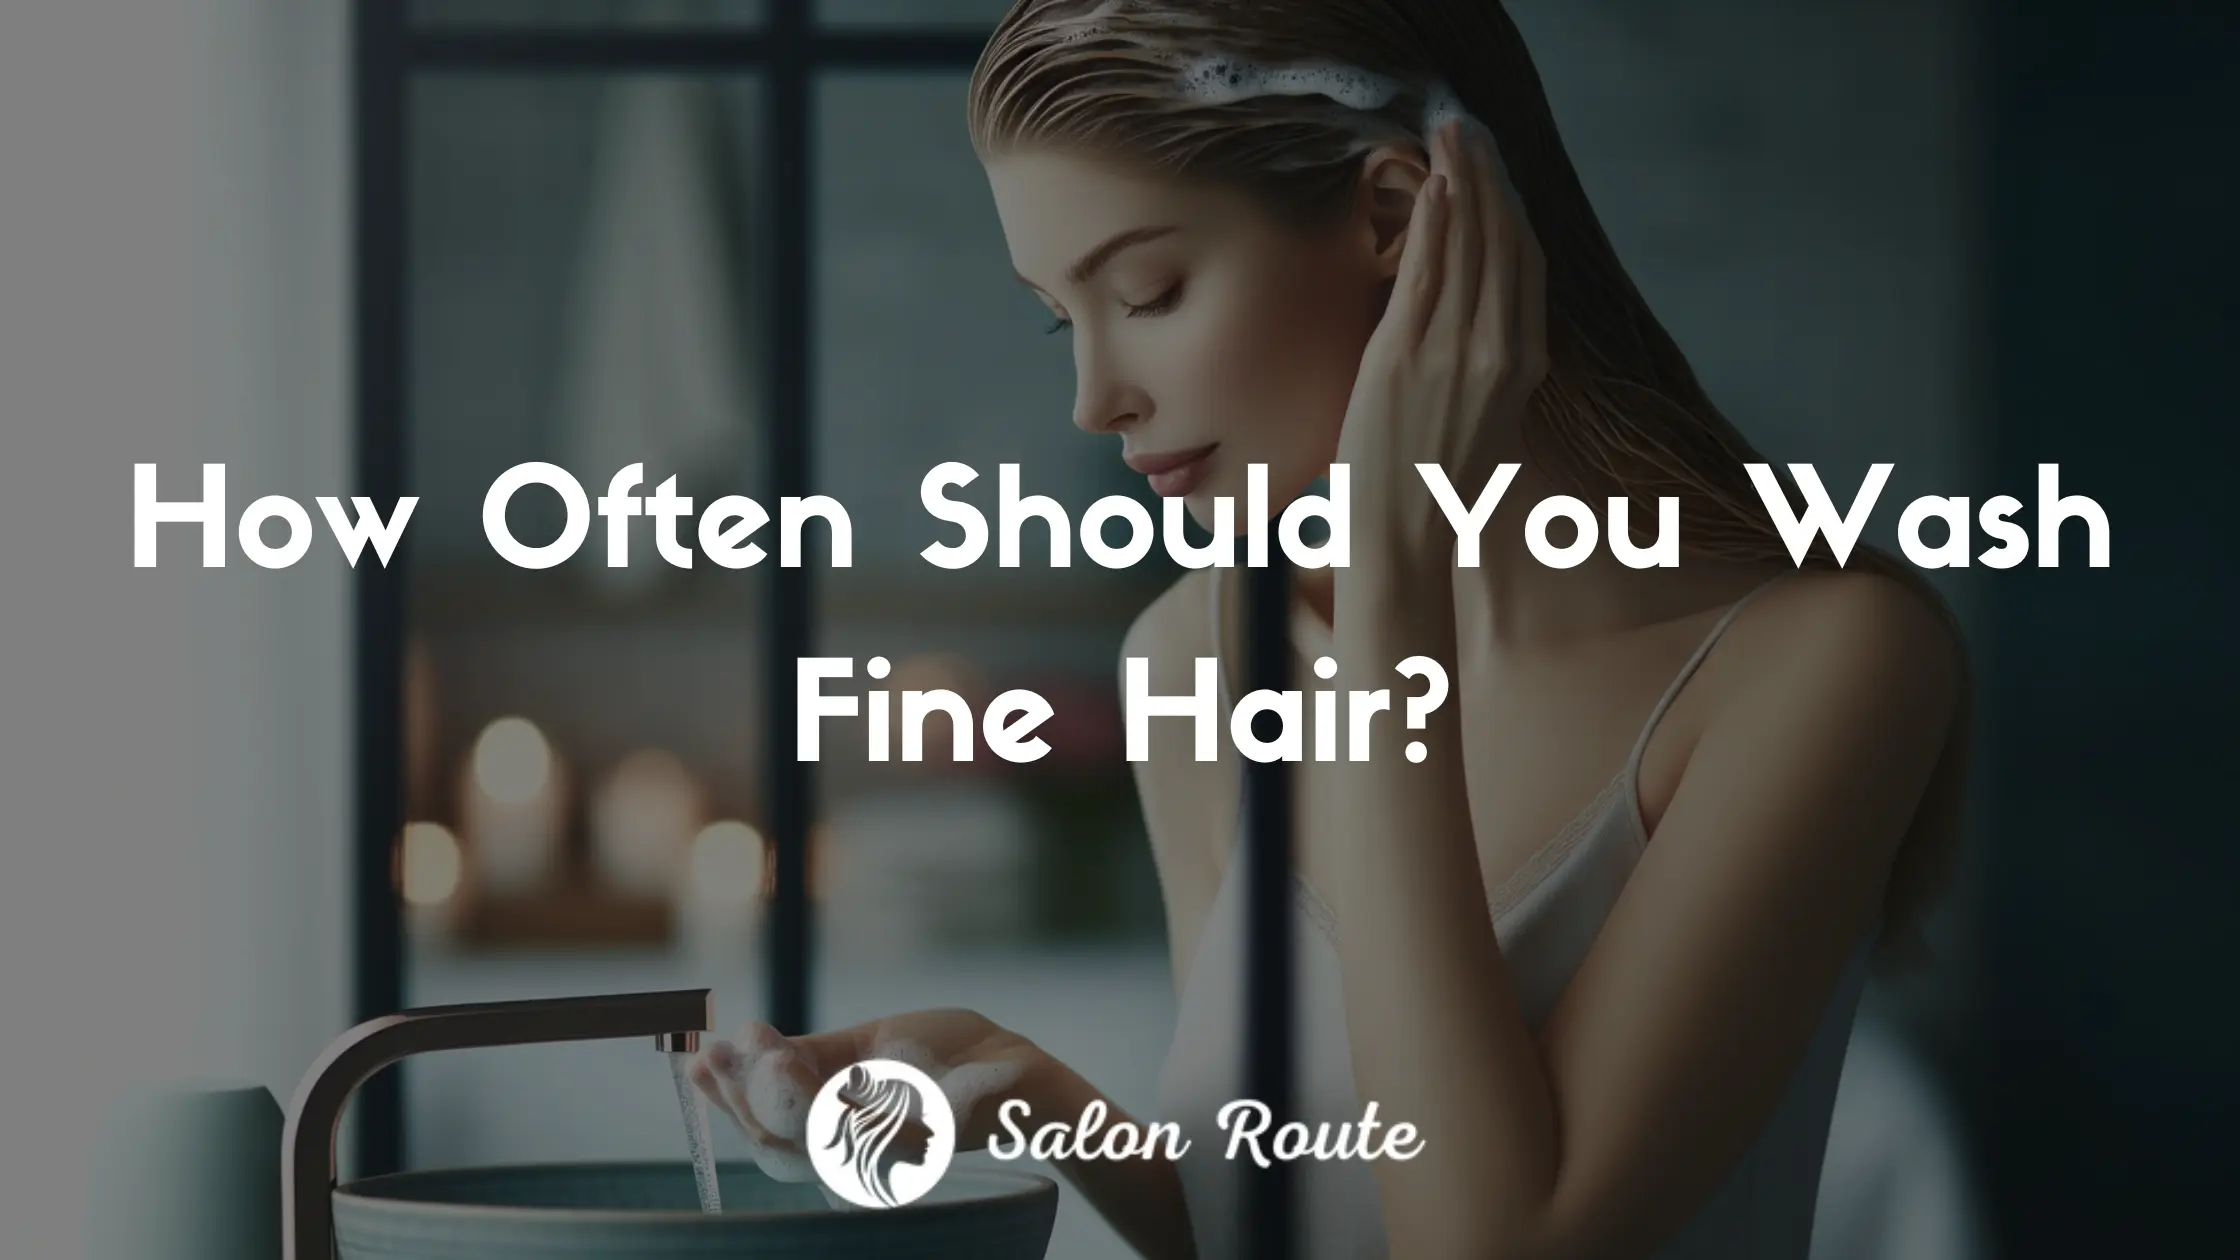 How Often Should You Wash Fine Hair?